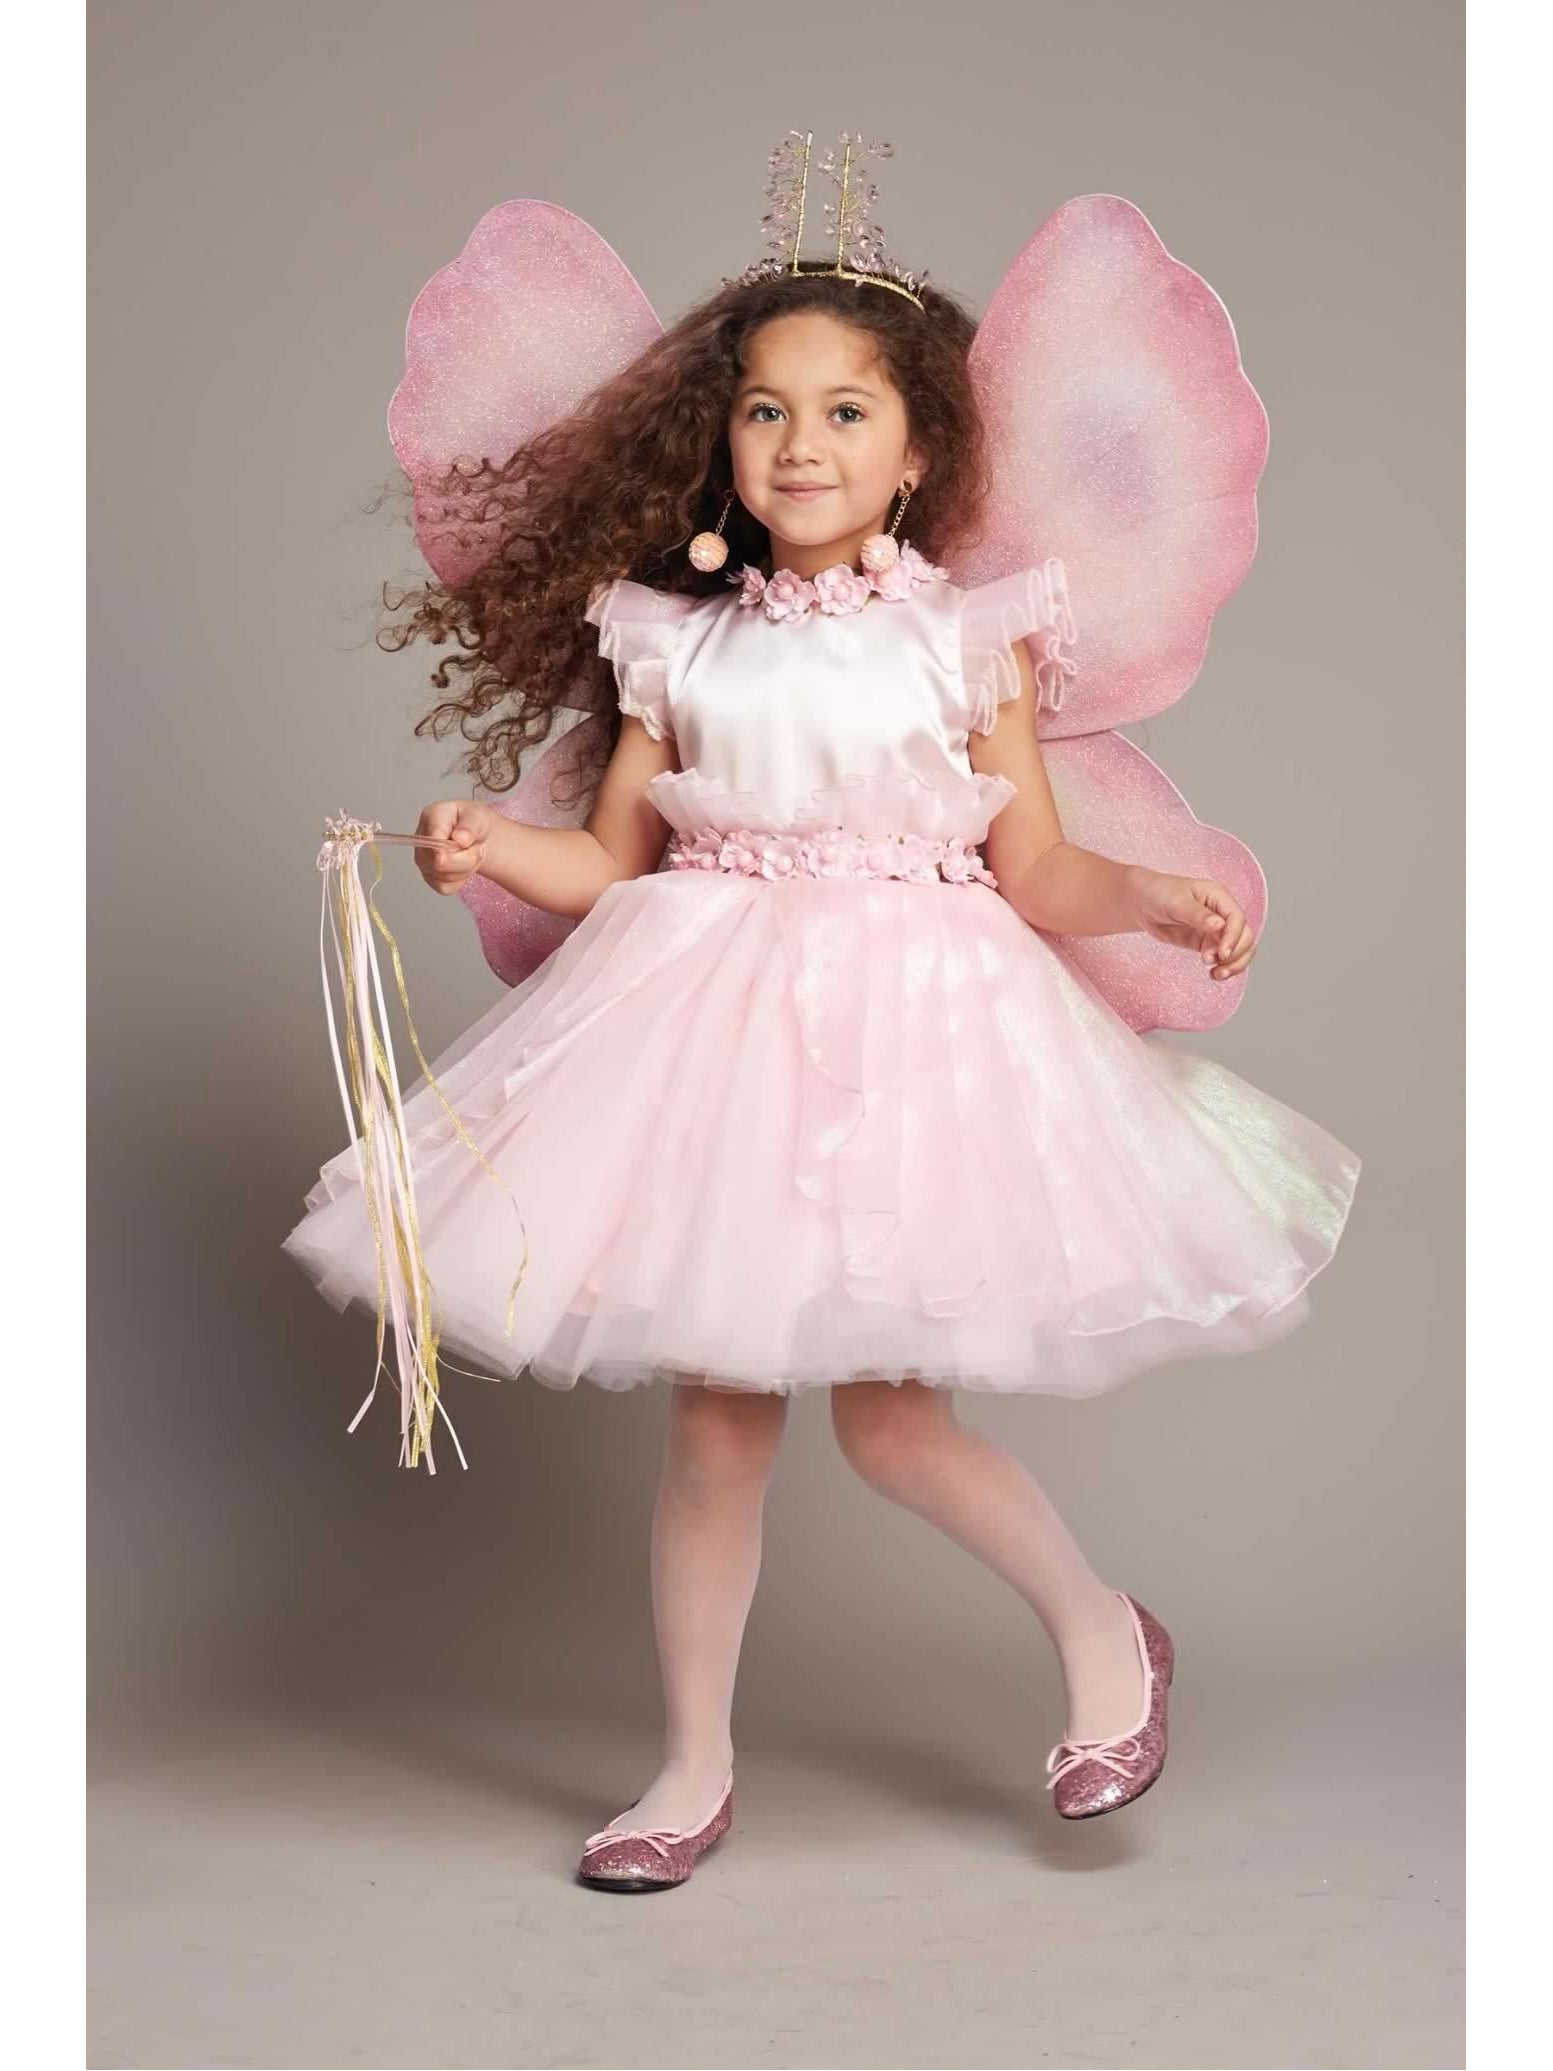 Pink Fairy Costume for Girls - Chasing ...